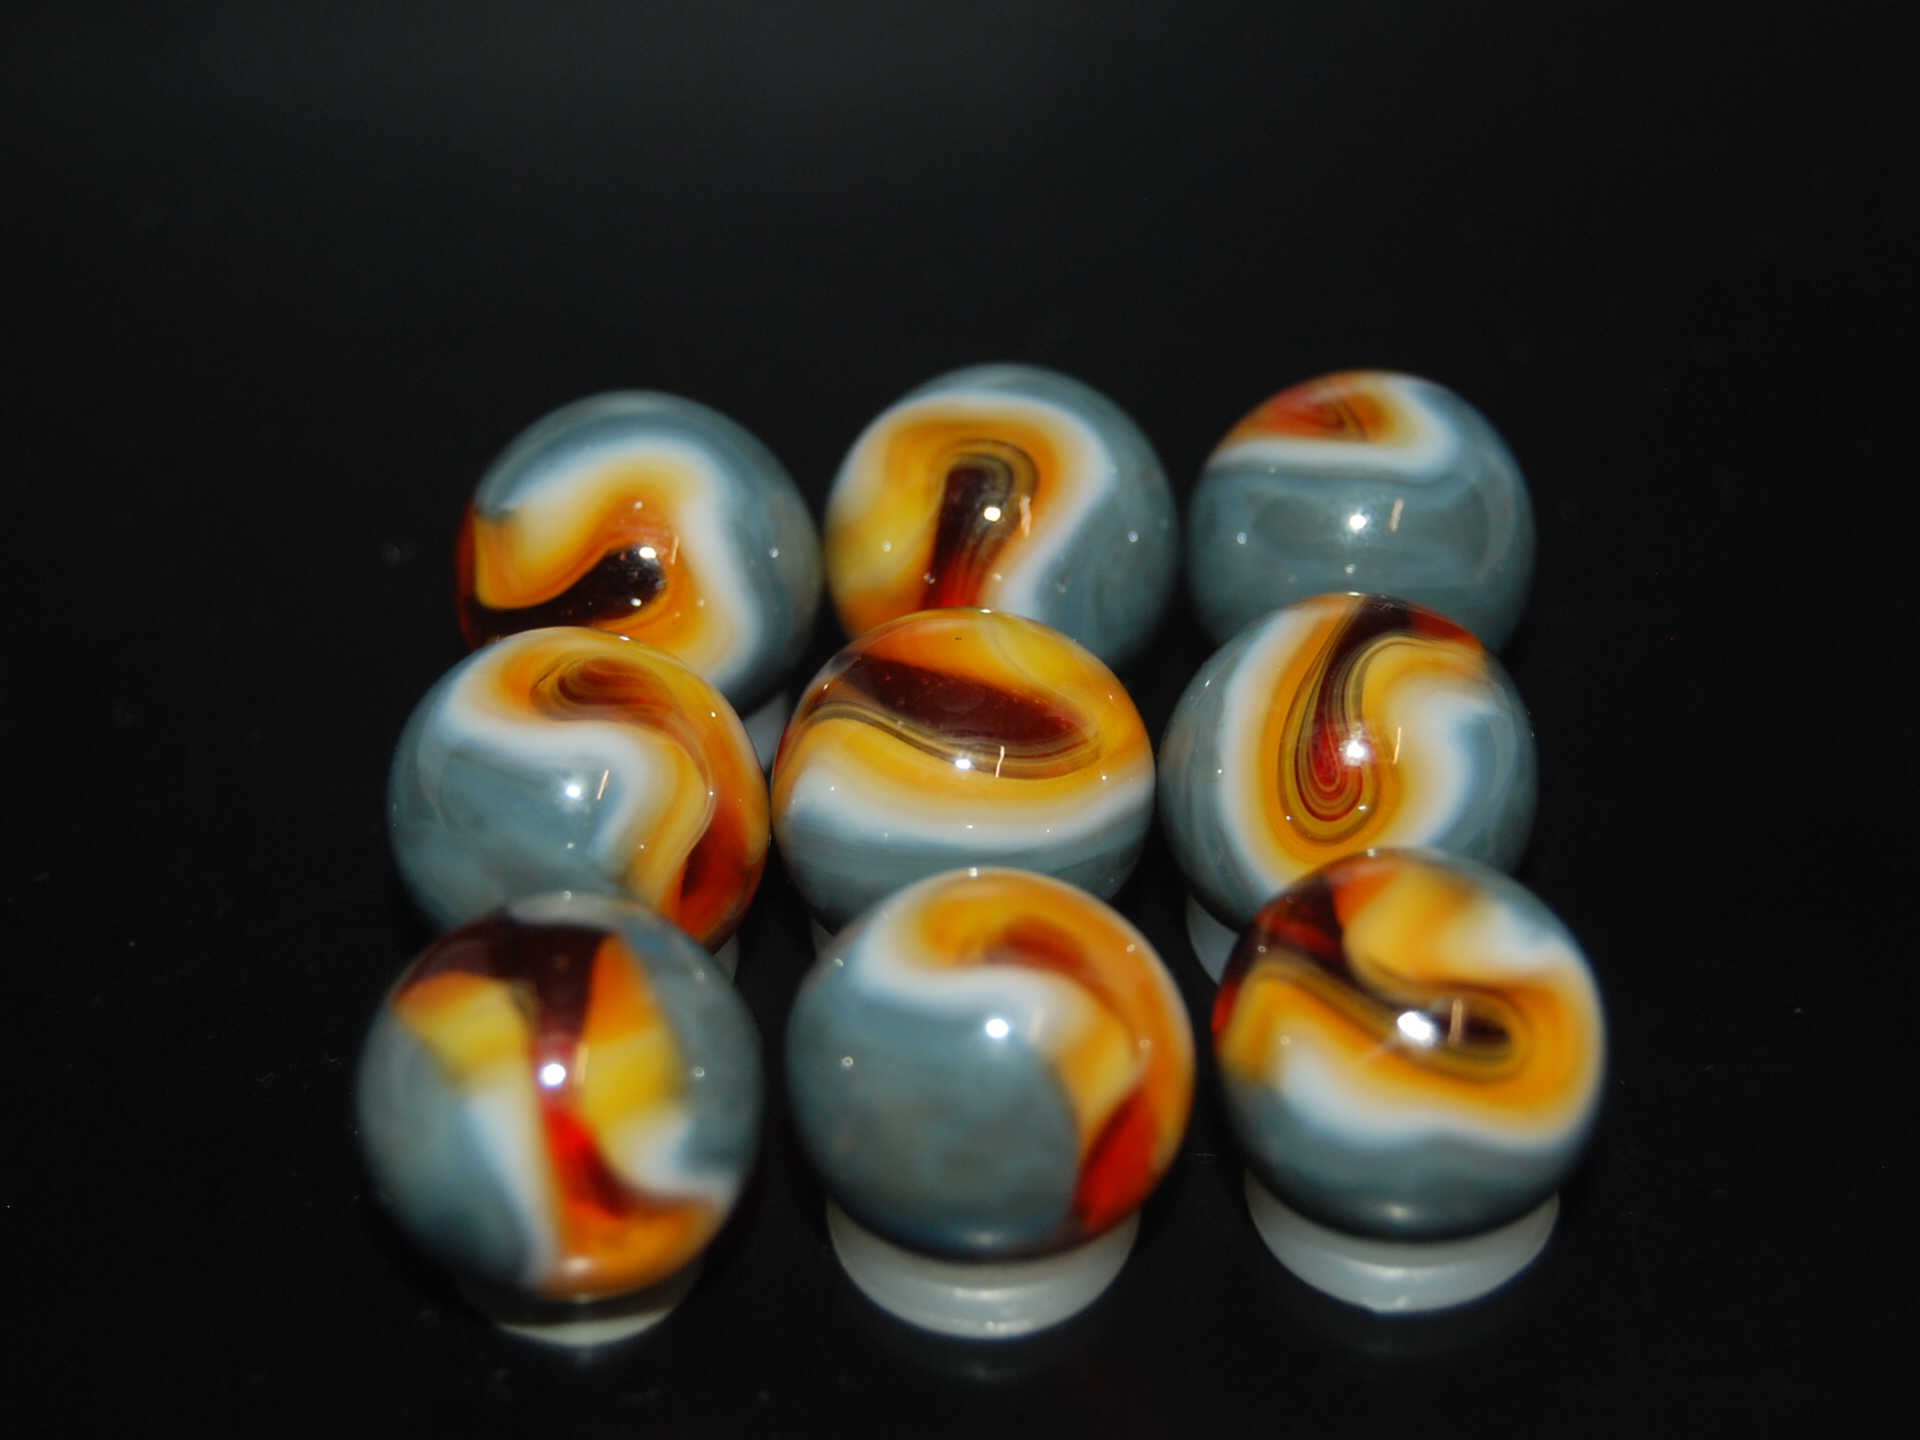 Details about   6  HTF 5/8"  HAND SELECTED JABO CLASSIC  MARBLES  $3.99  LOT Y 